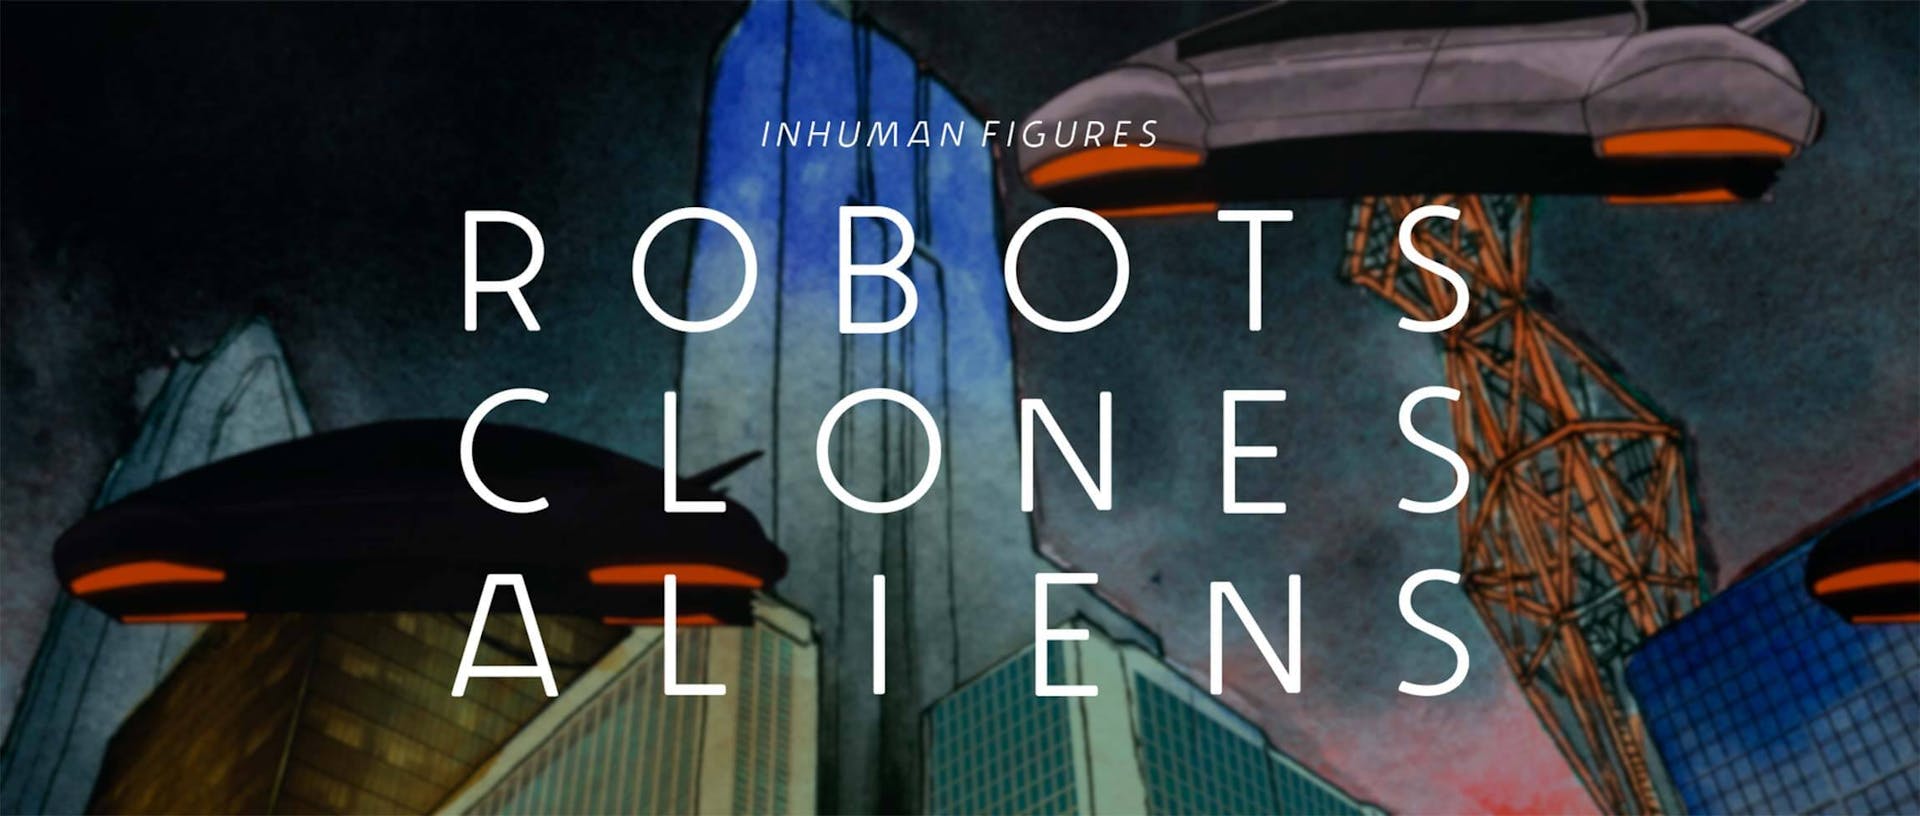 Futuristic city scape with high rises and flying cars with the text "Robots Clones Aliens"